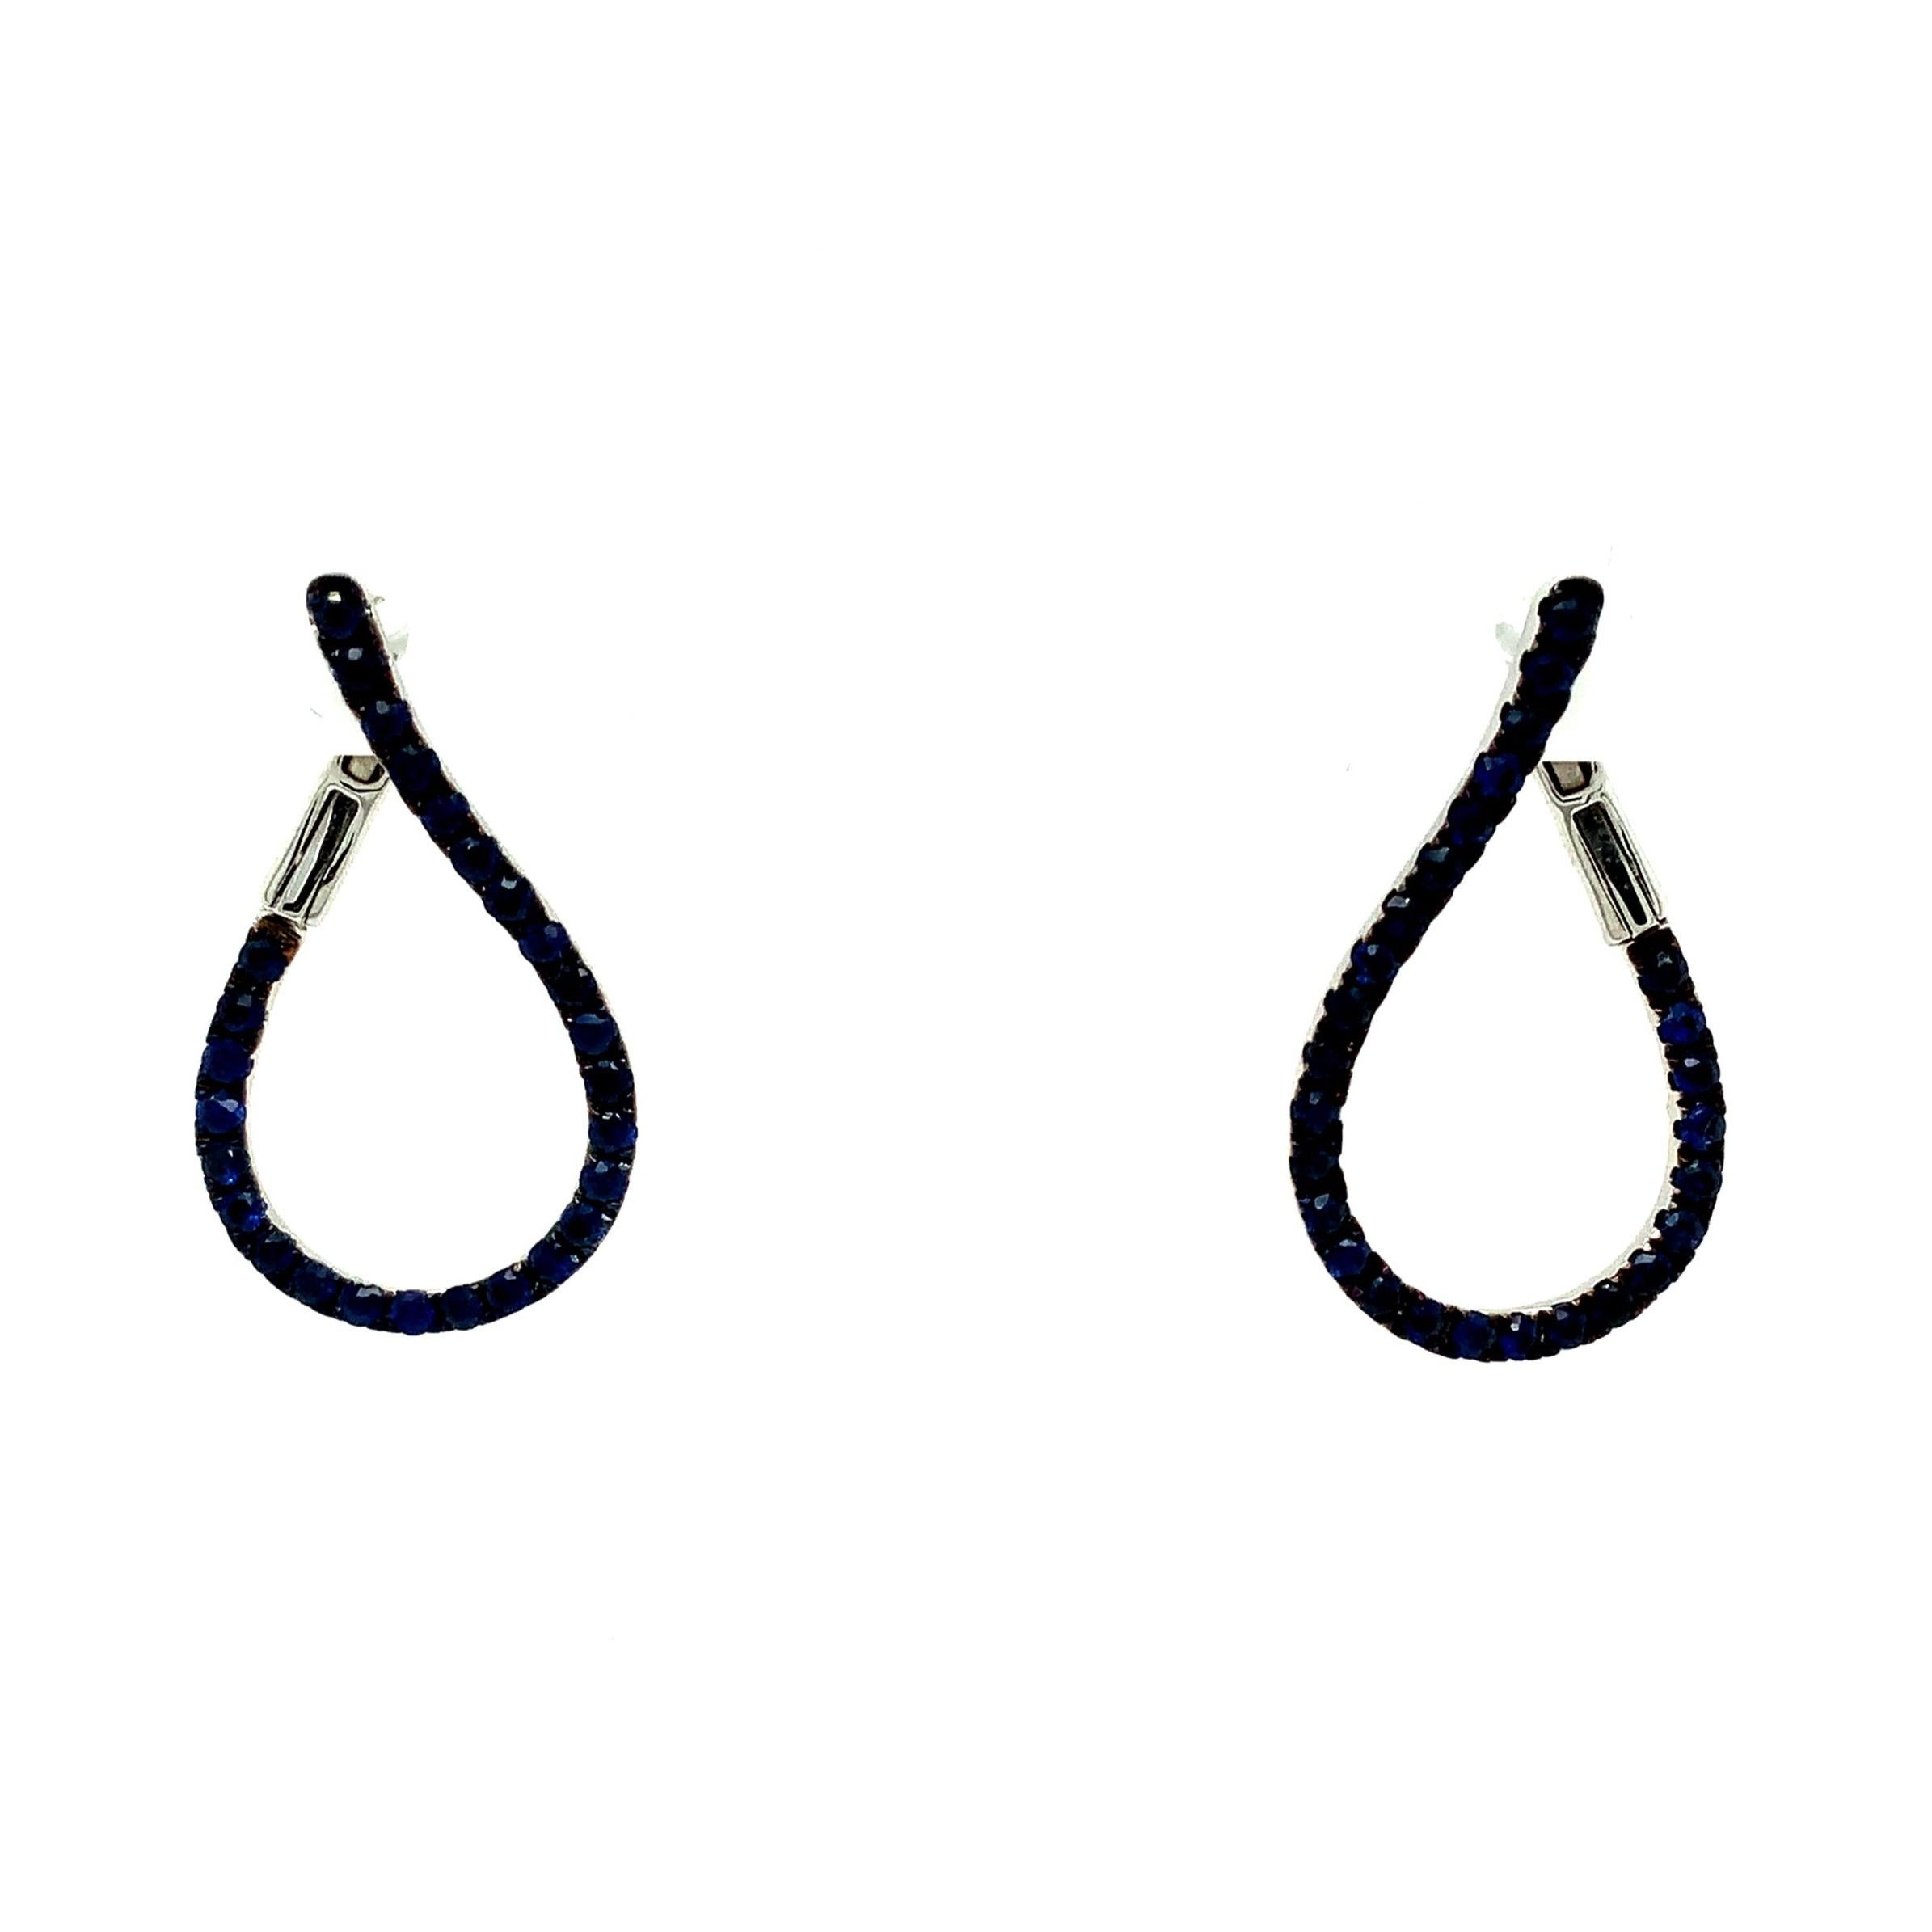 Afarin Collection Blue Sapphire Tear Drop Shaped Hoop Earring Set in 18K White Gold and Black Rhodium Finish, these earrings make a great foundation to hang your favorite bauble on! Diamonds, Pearls would look great on these earrings when it's time